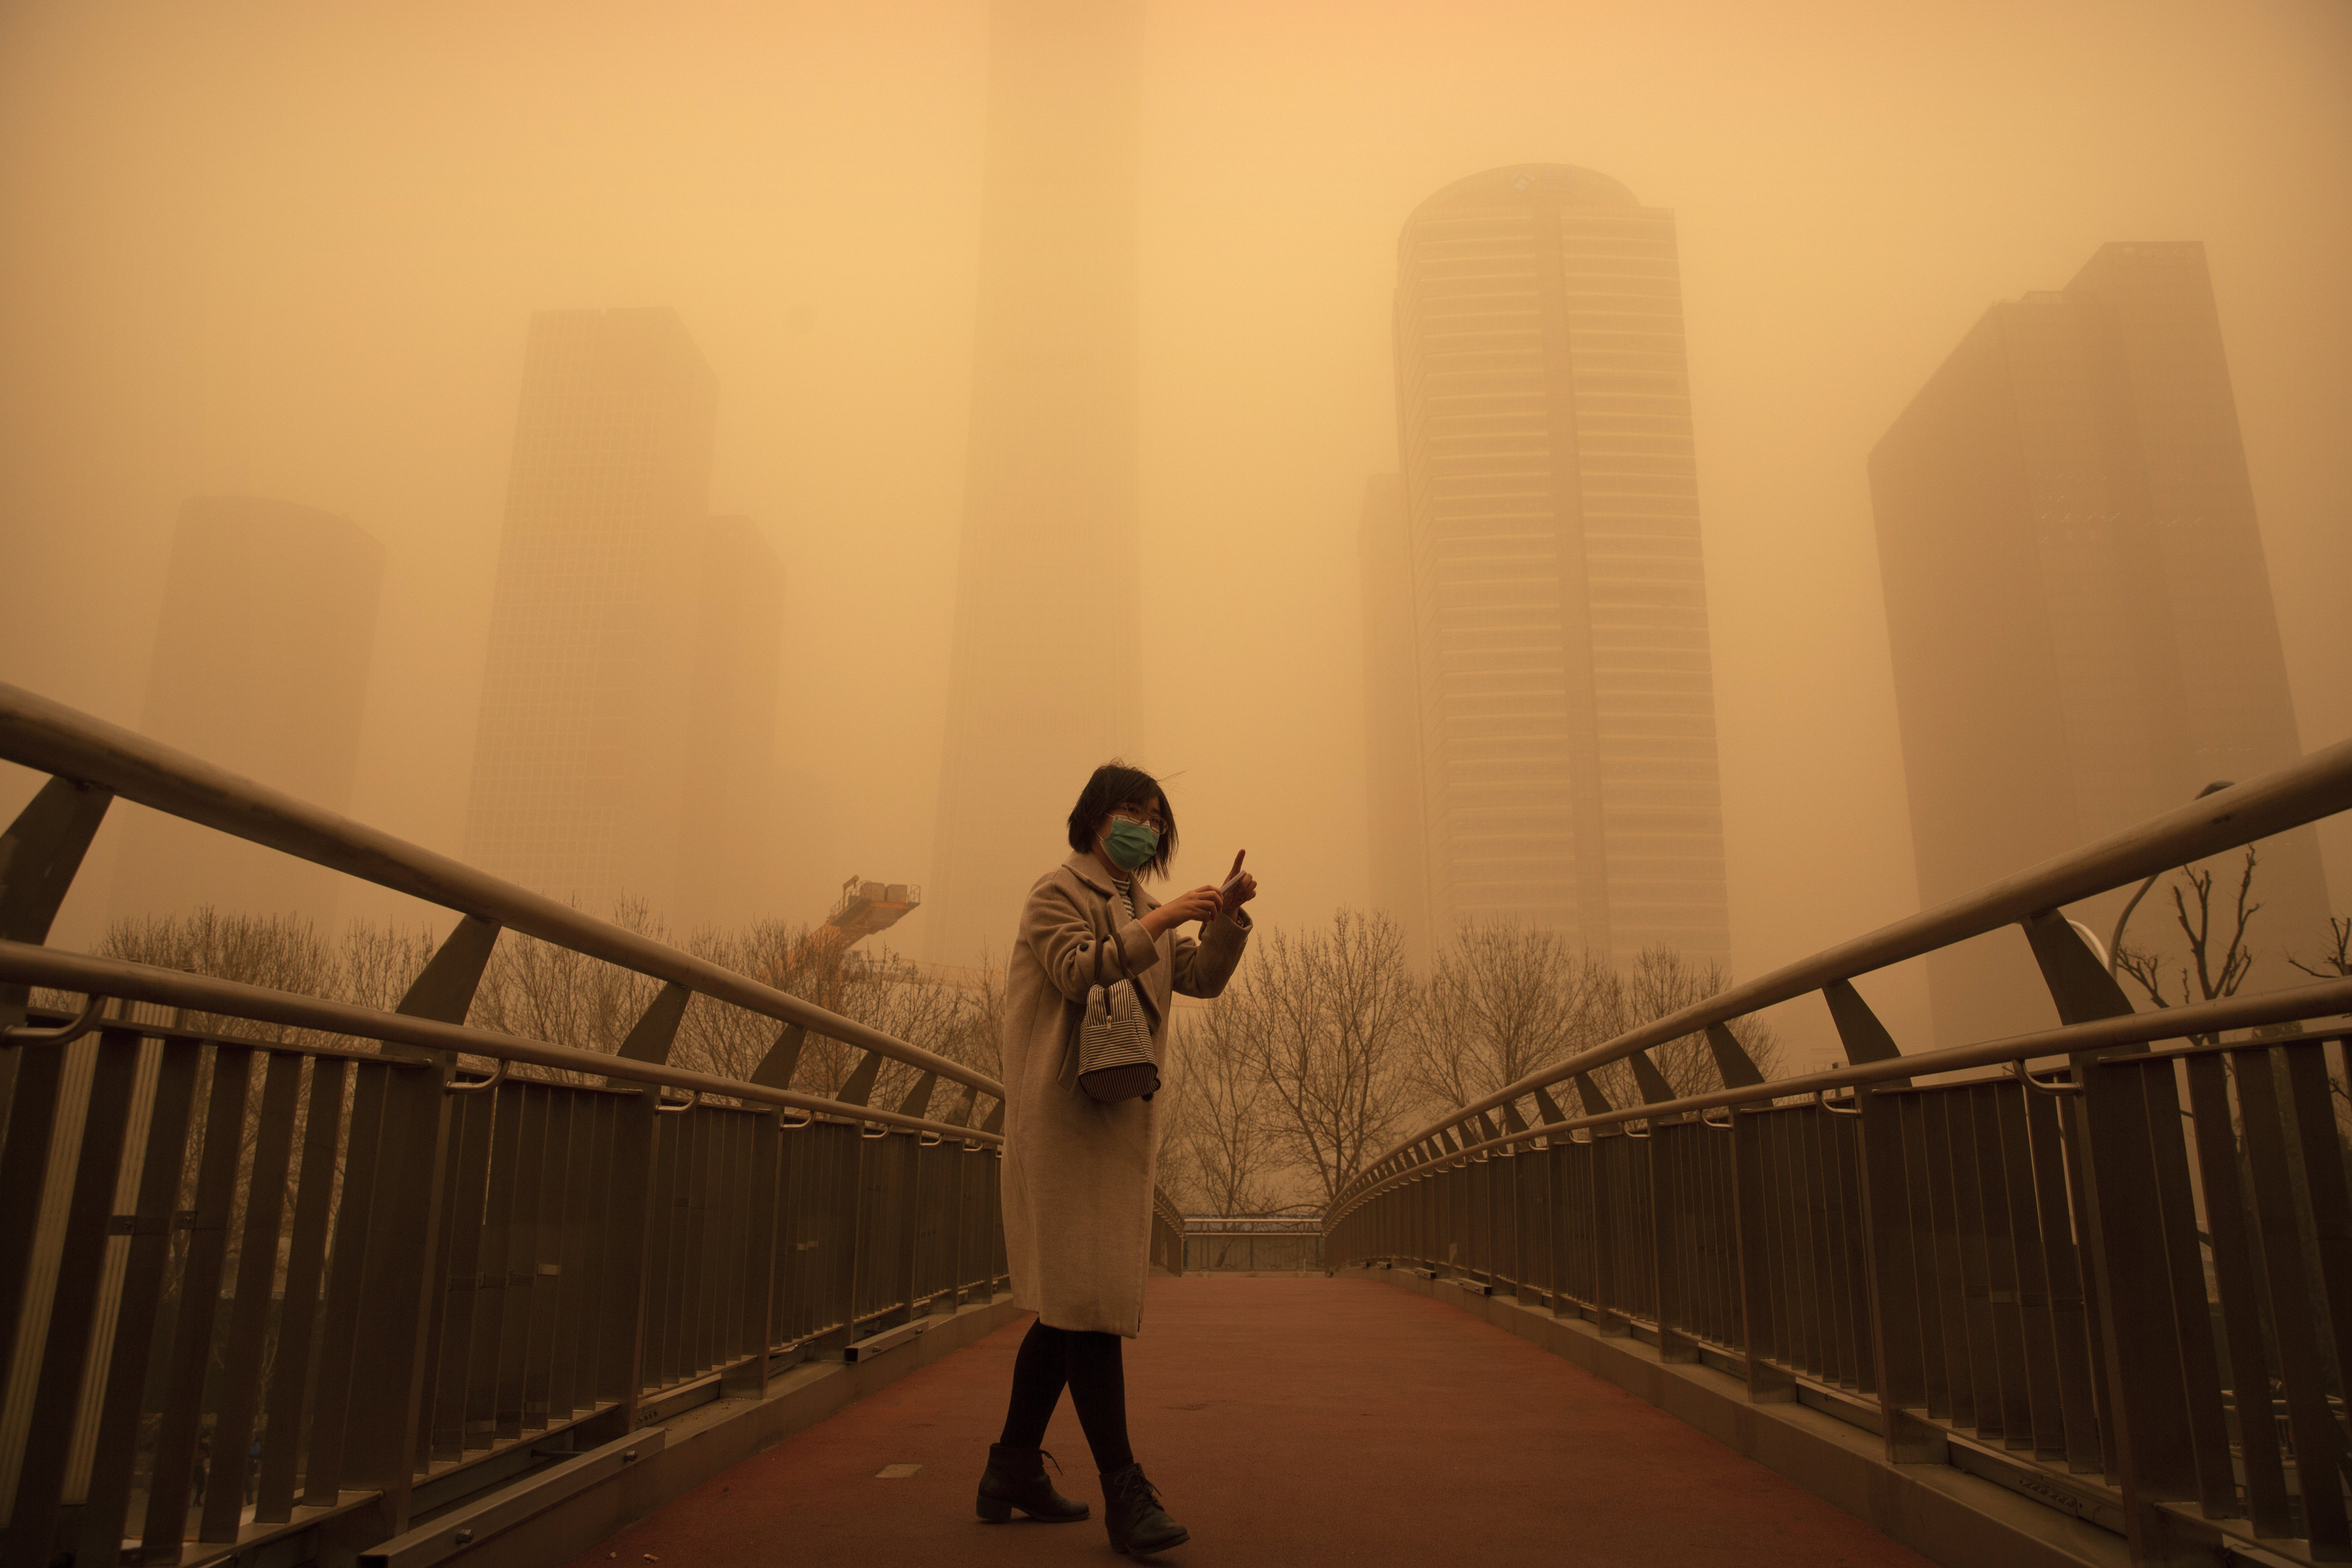 China and Mongolia are working together to prevent desertification, which can result in sandstorms blanketing major cities, as was seen here in Beijing in March 2021. Photo: AP